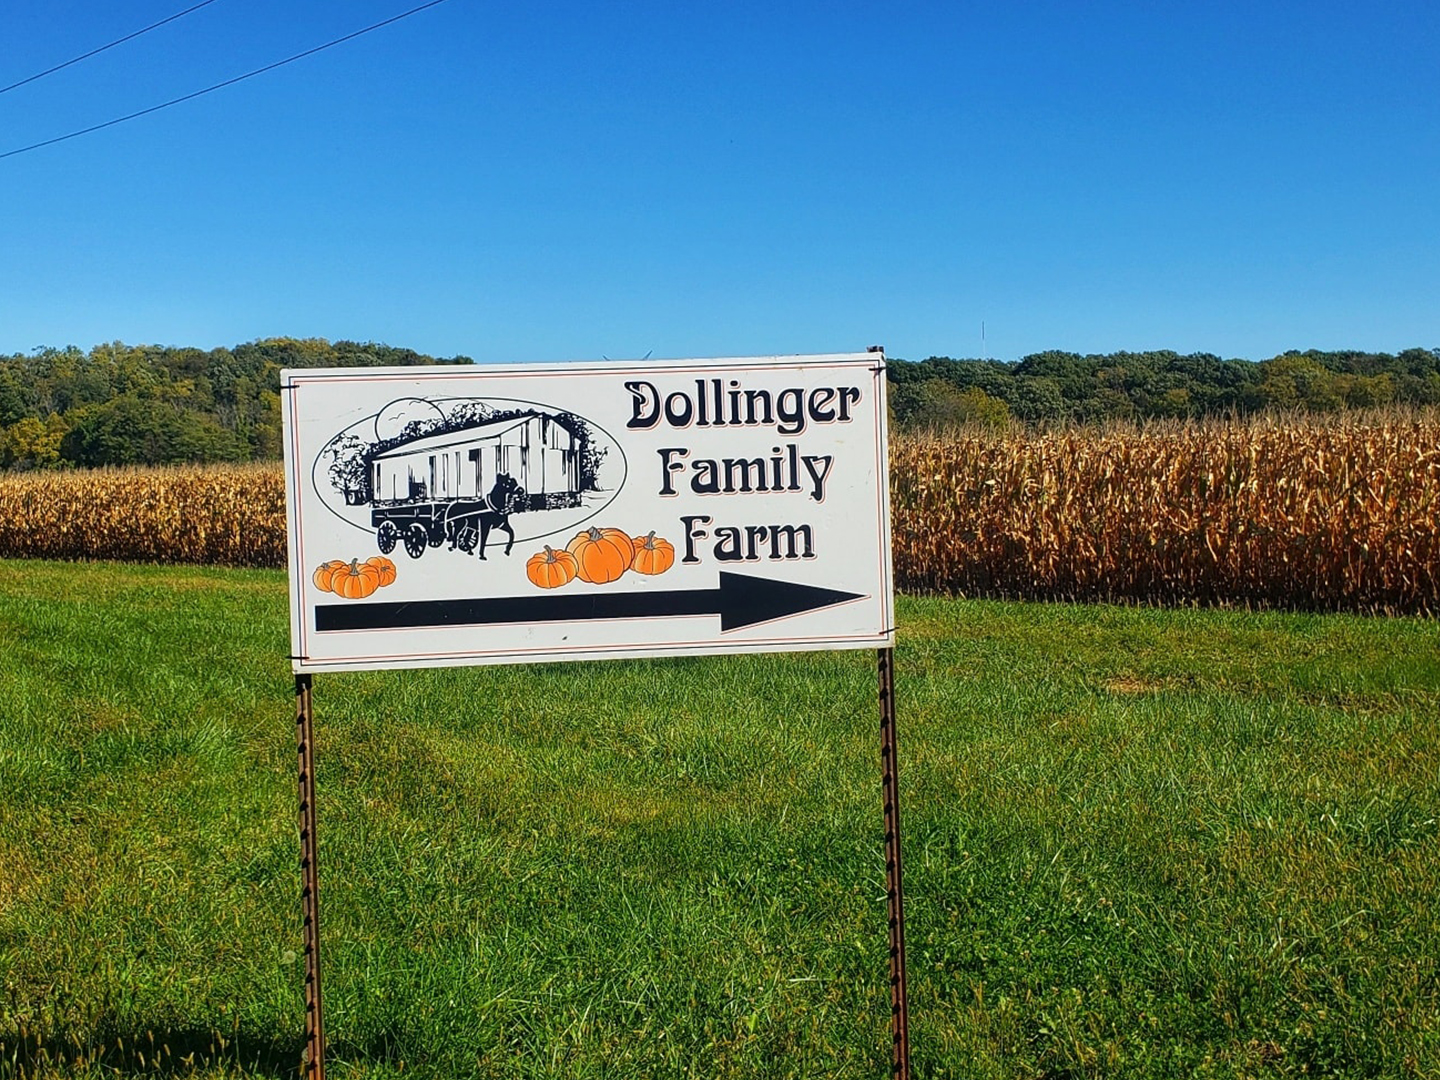 Welcome sign at dollinger farm with an arrowing pointing where to go